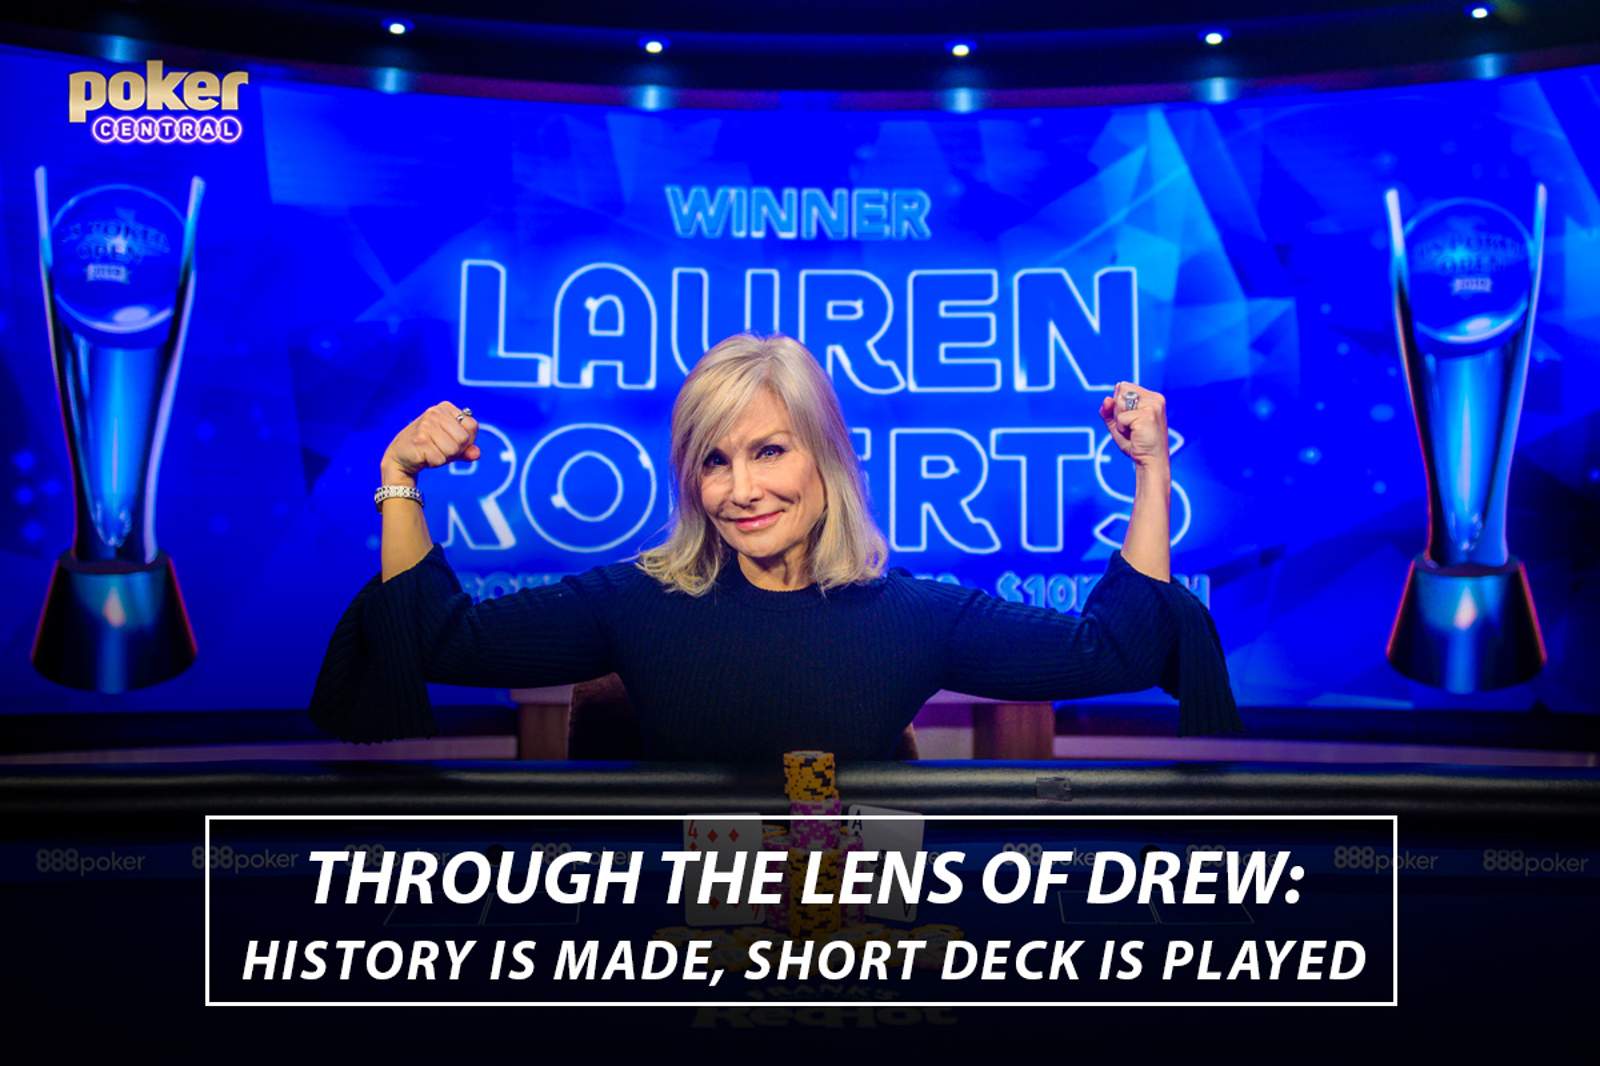 Through the Lens: History is Made, Short Deck is Played